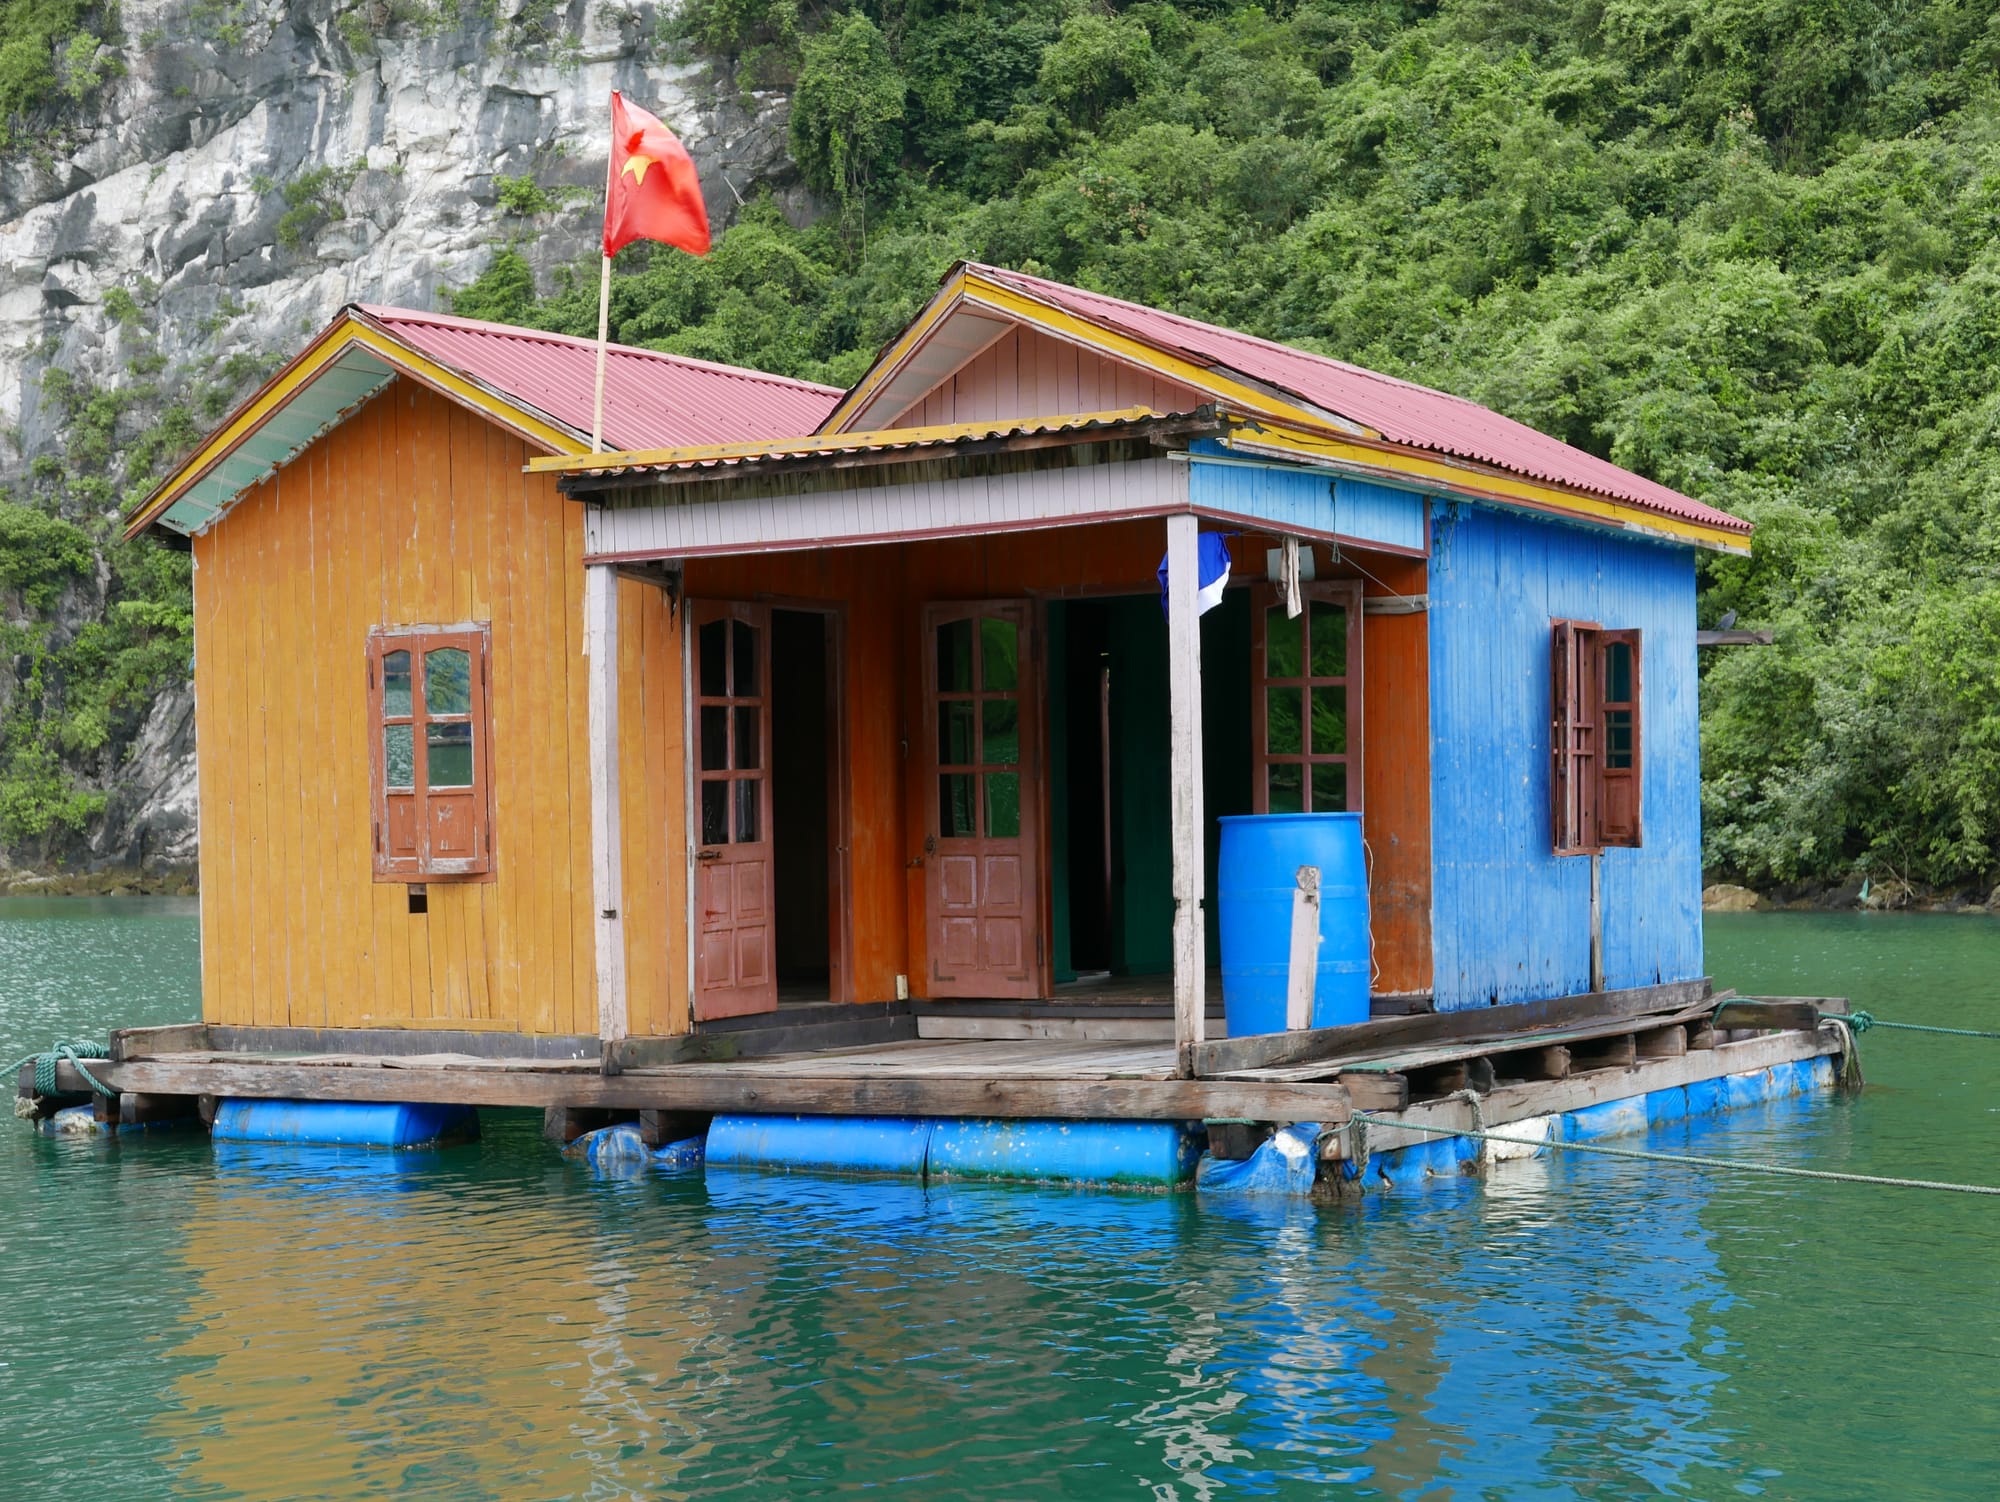 Photo by Author — a house in a fishing village, Ha Long Bay, Vietnam